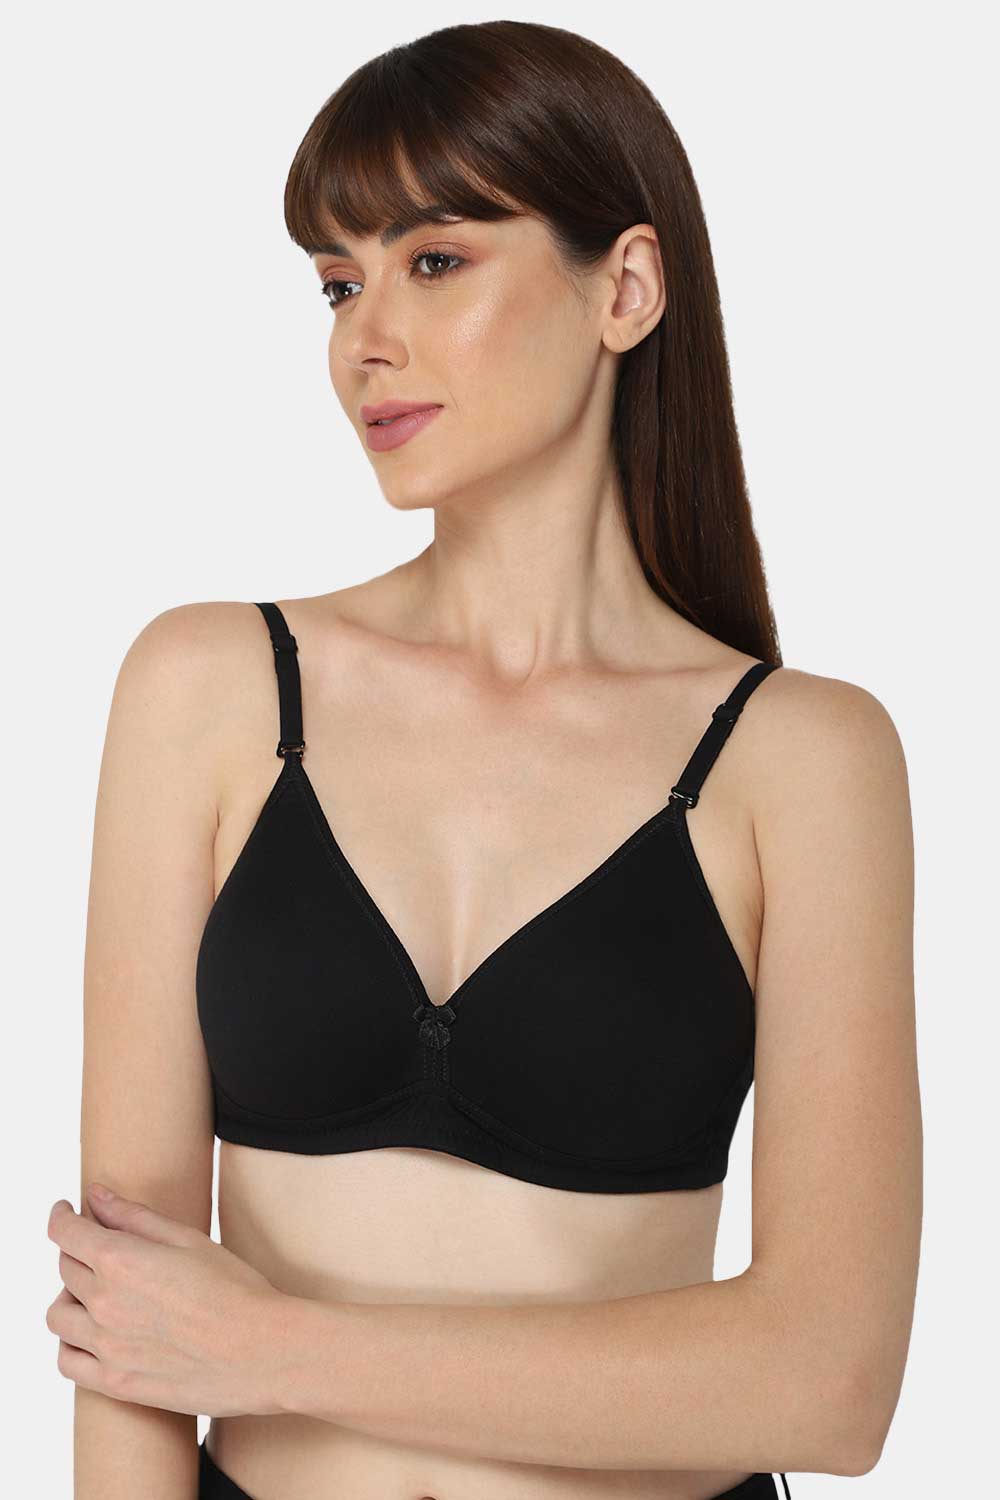 Cotton Non-Padded Ladies Strapless Bras, 6 colours at Rs 35/piece